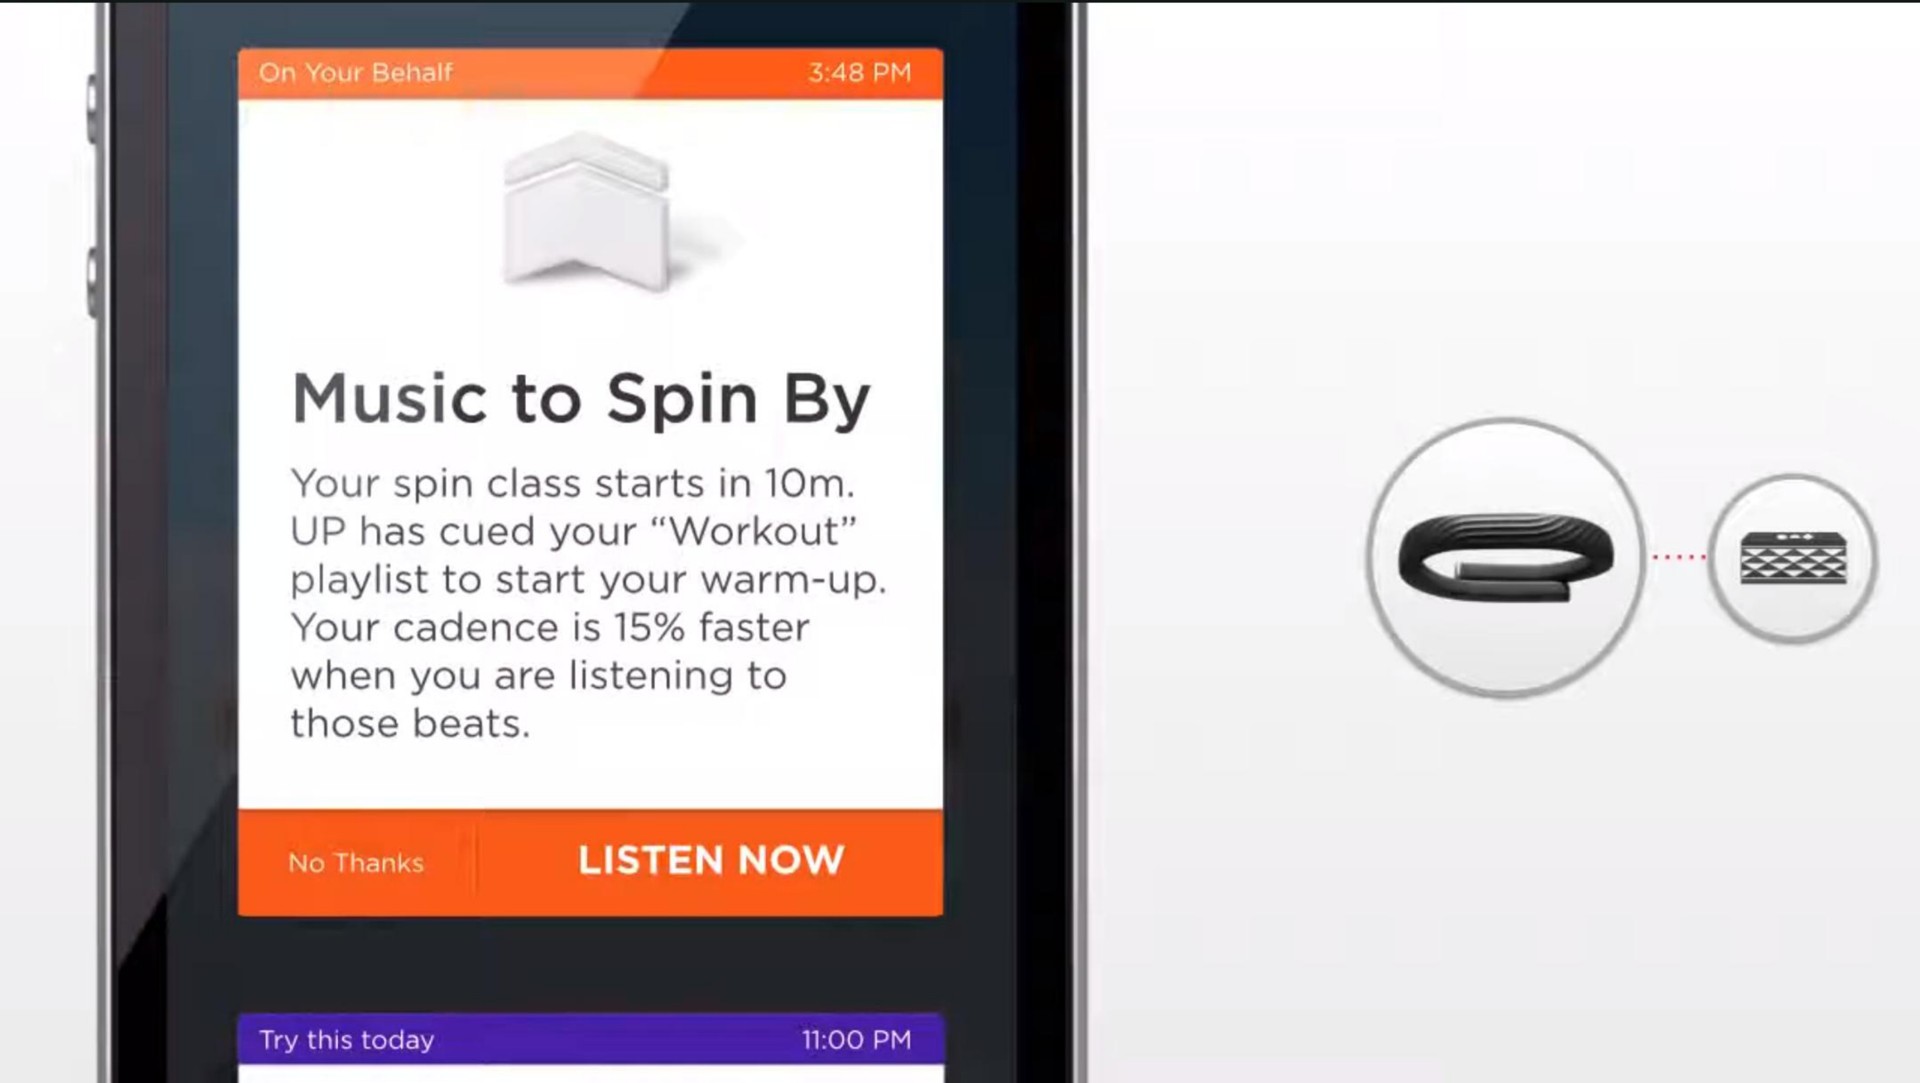 music to spin by up has cued your workout | Jawbone